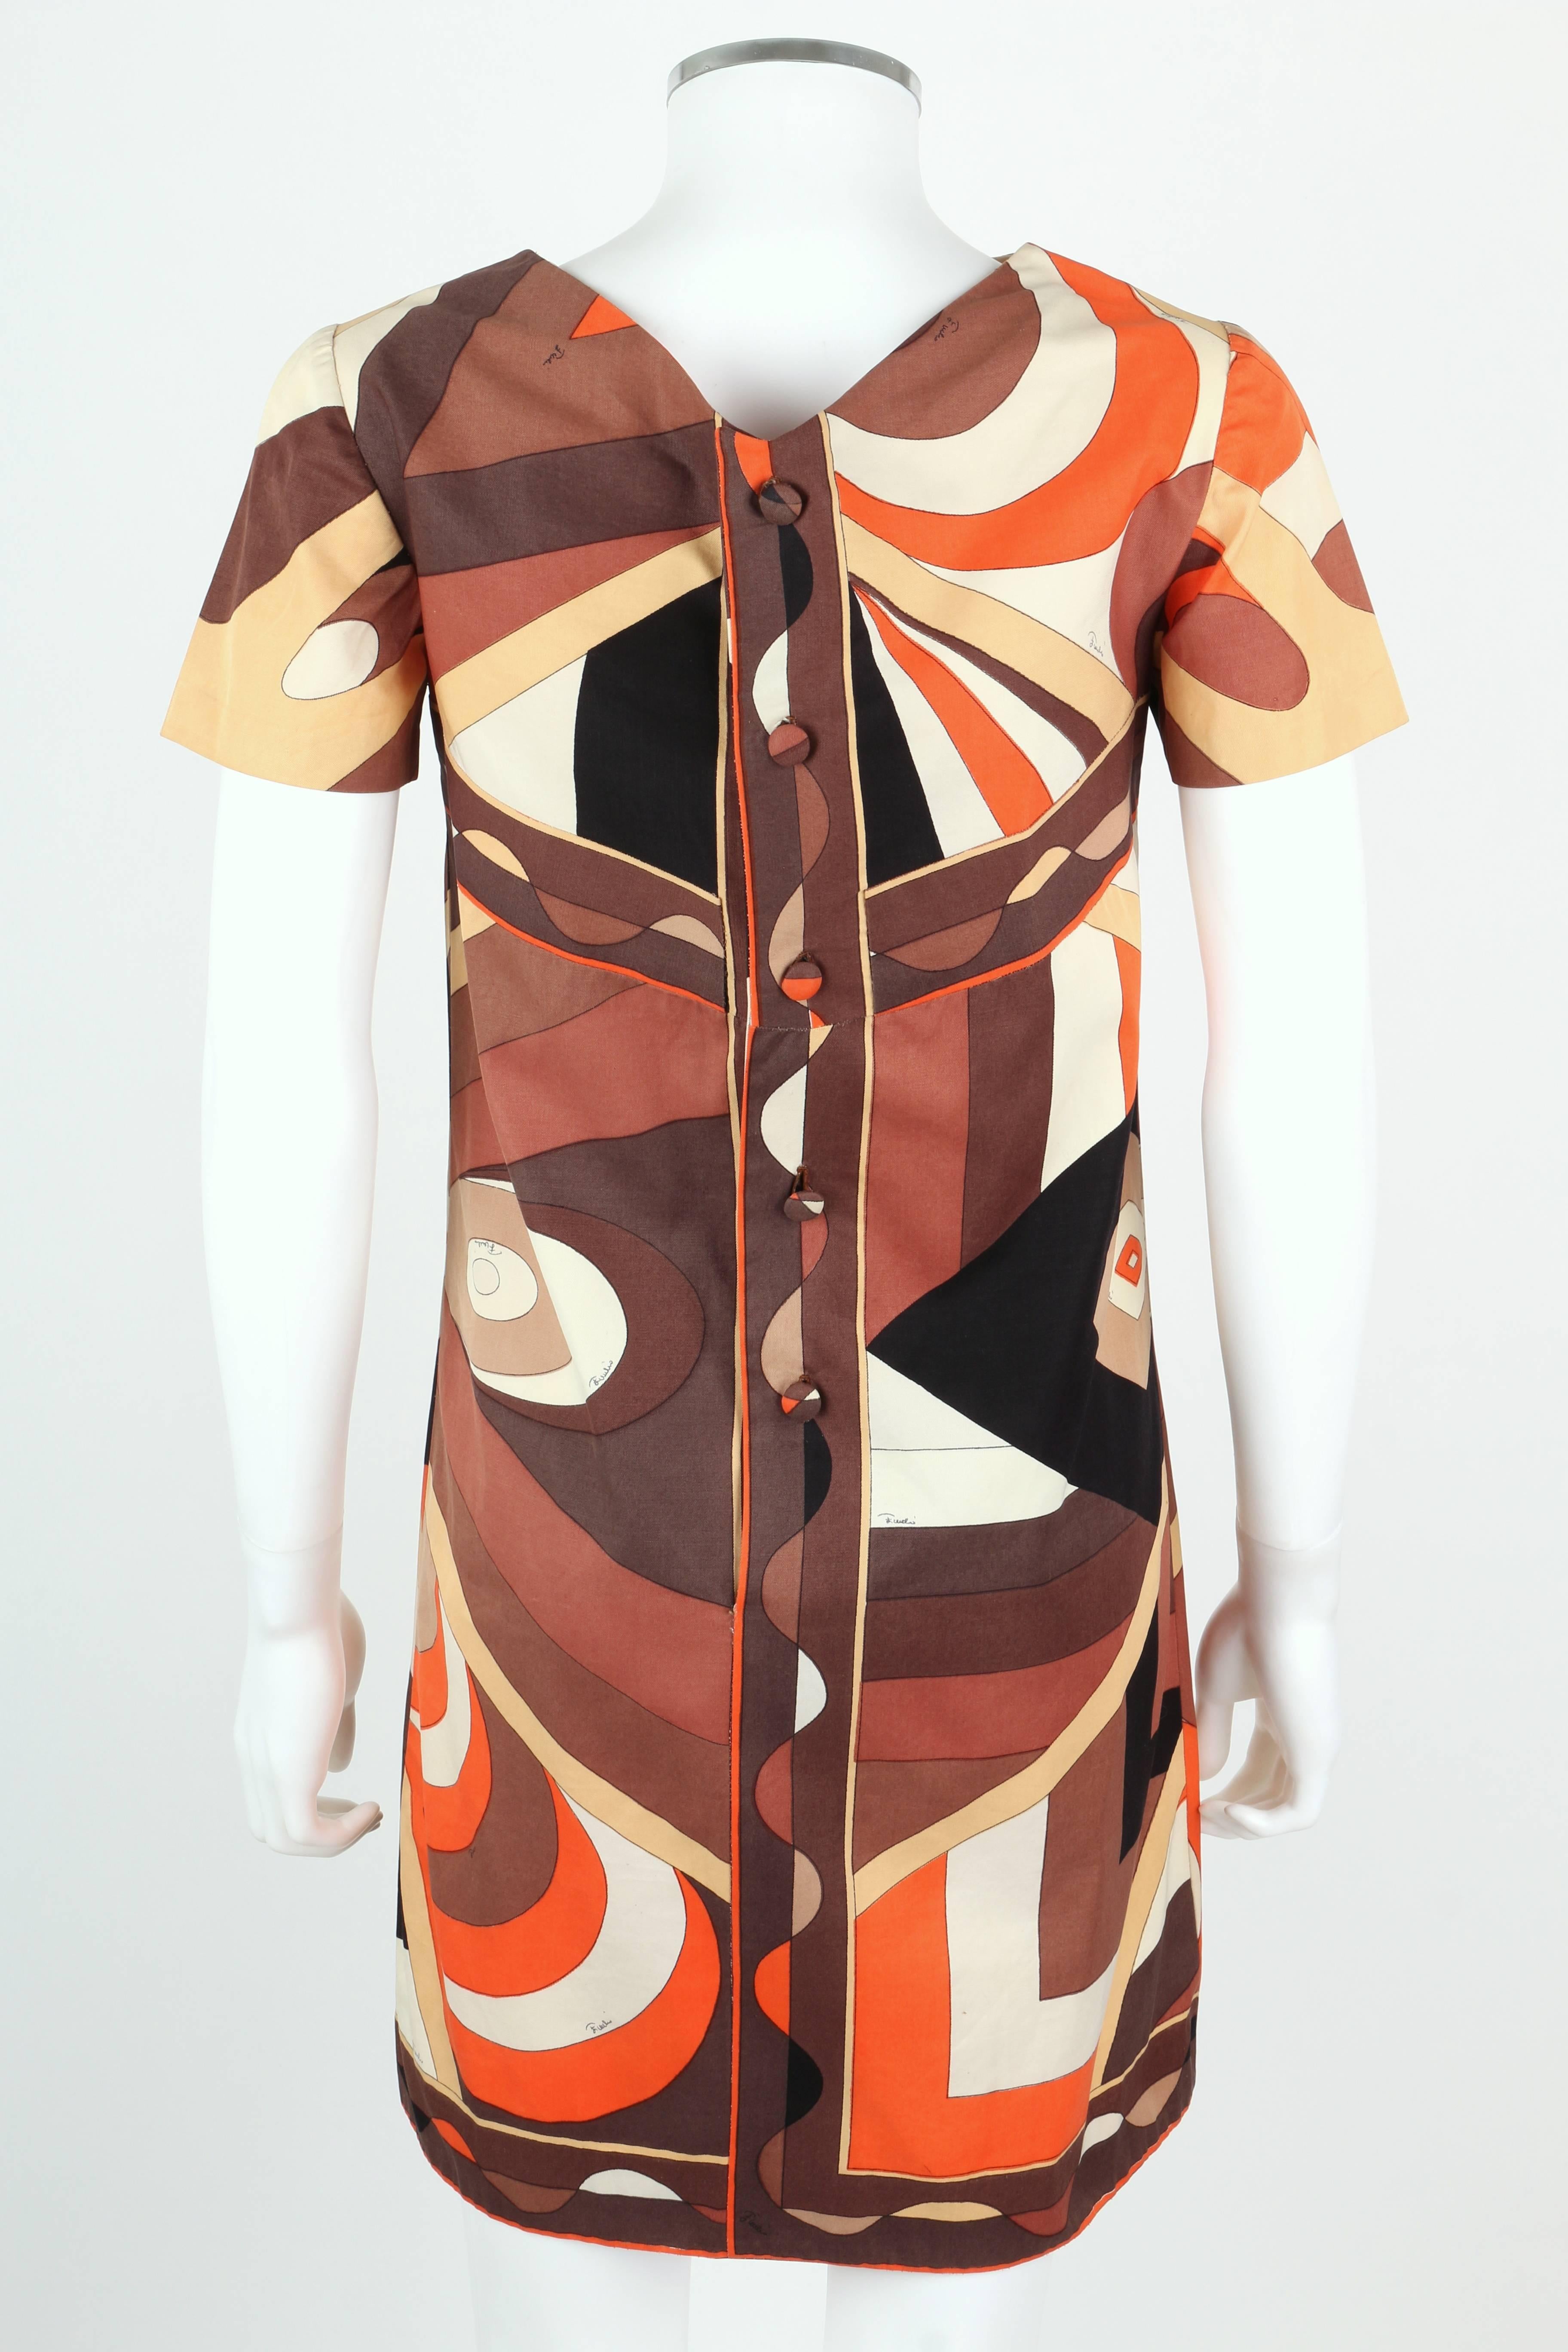 EMILIO PUCCI 1960s Brown Op Art Signature Print Short Sleeve Shift Dress Size 10 In Good Condition For Sale In Thiensville, WI